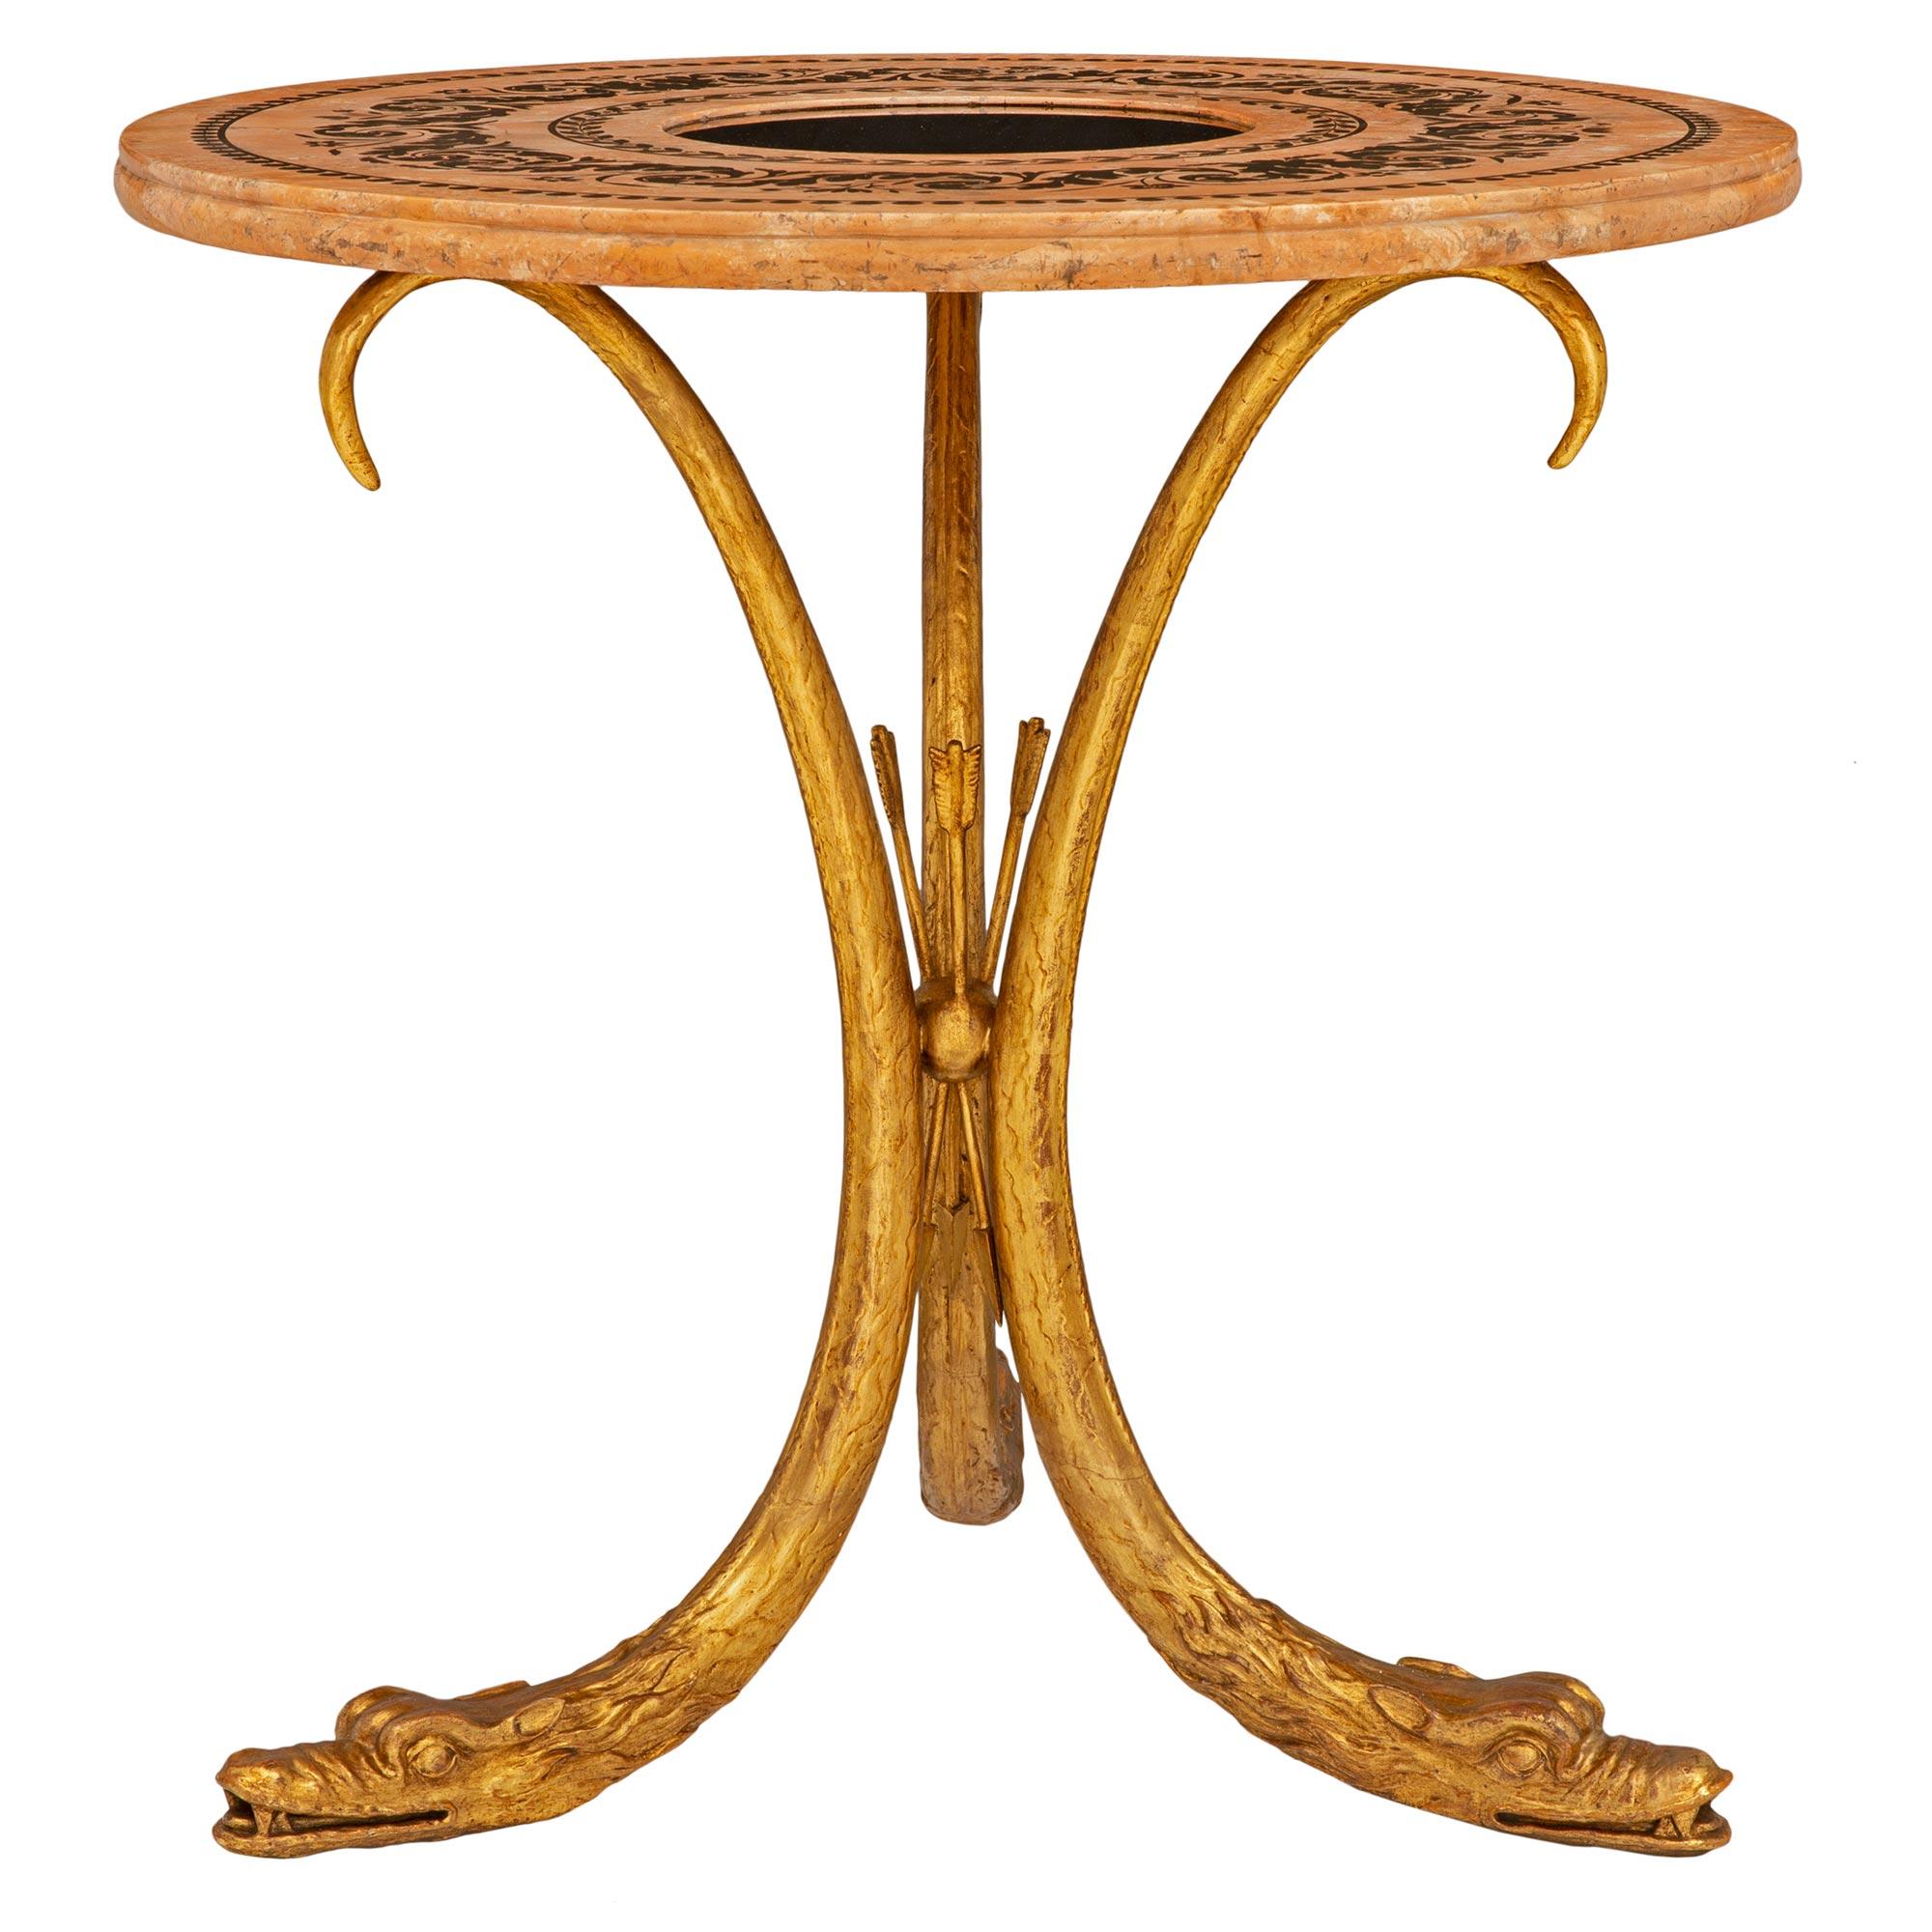 A striking and most unique Italian 19th century Neo-Classical st. giltwood, scagliola and cobalt blue glass center table. The table is raised by three elegant lightly curved supports of impressive and richly carved snakes with fine attention to